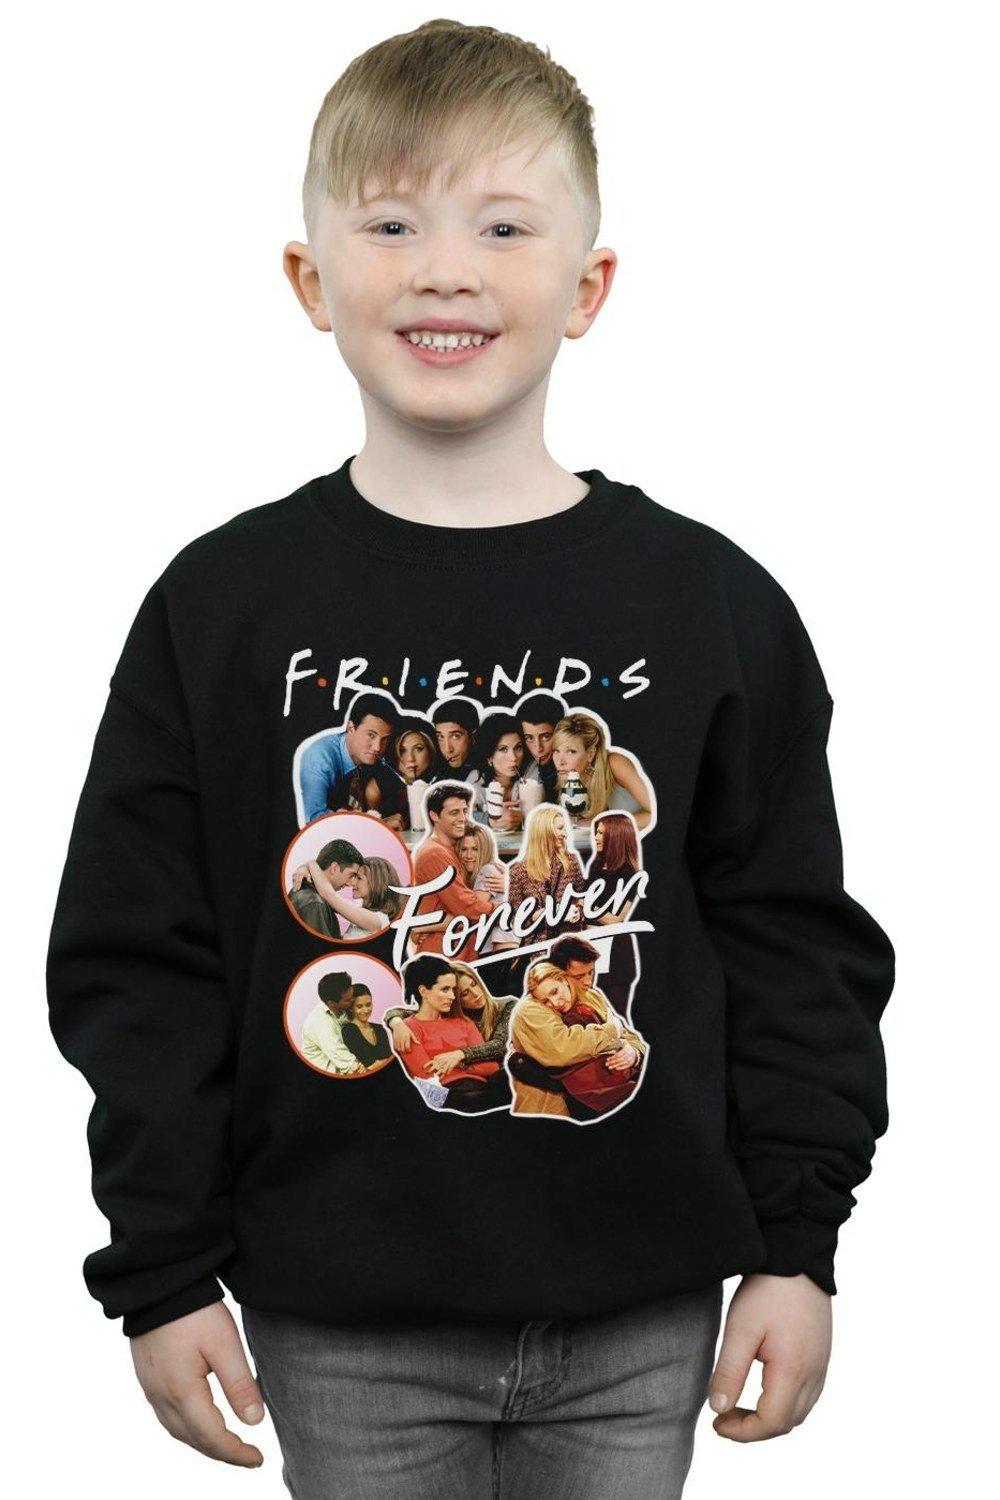 The One With All The Hugs Sweatshirt